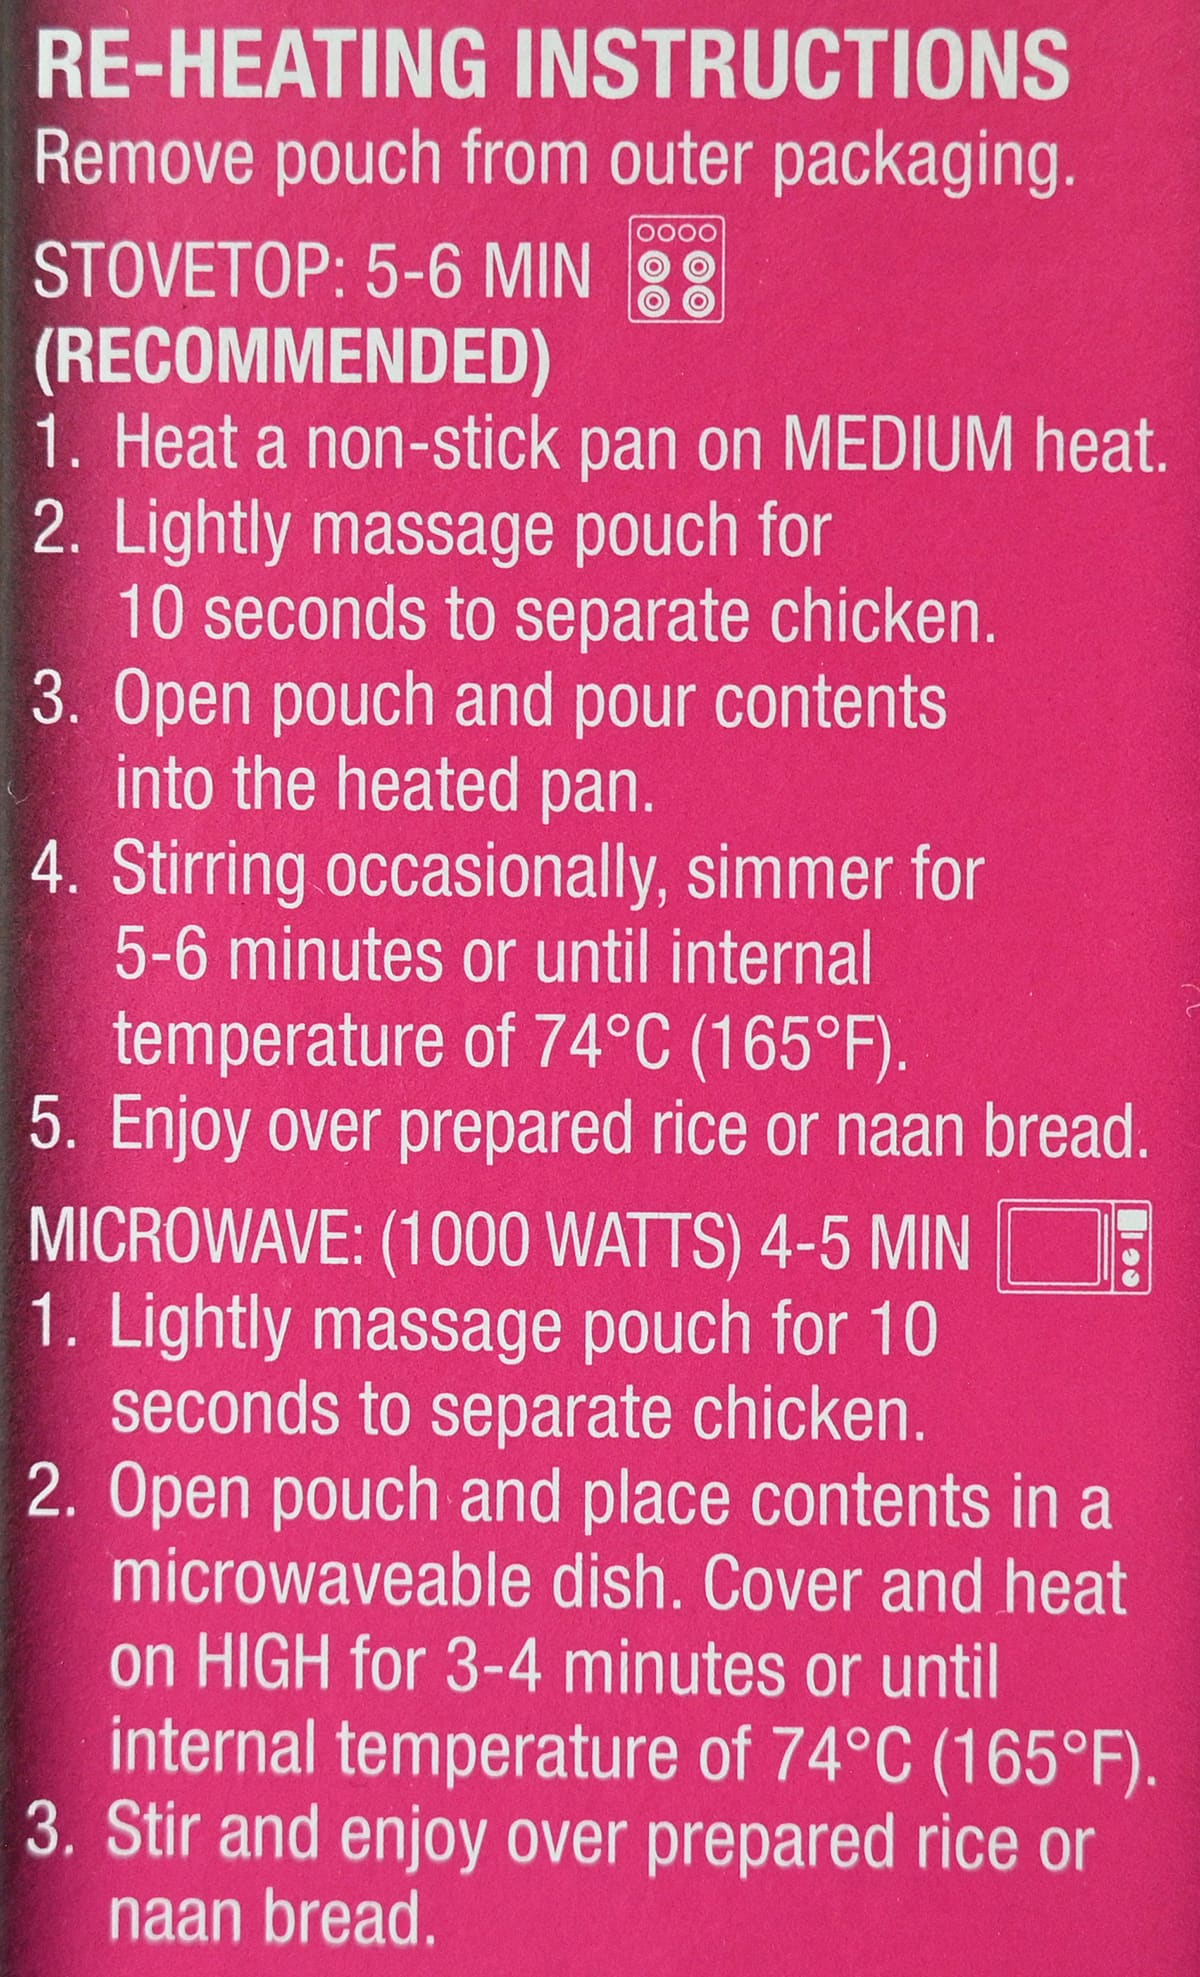 Heating instructions for the tikka masala from the package.